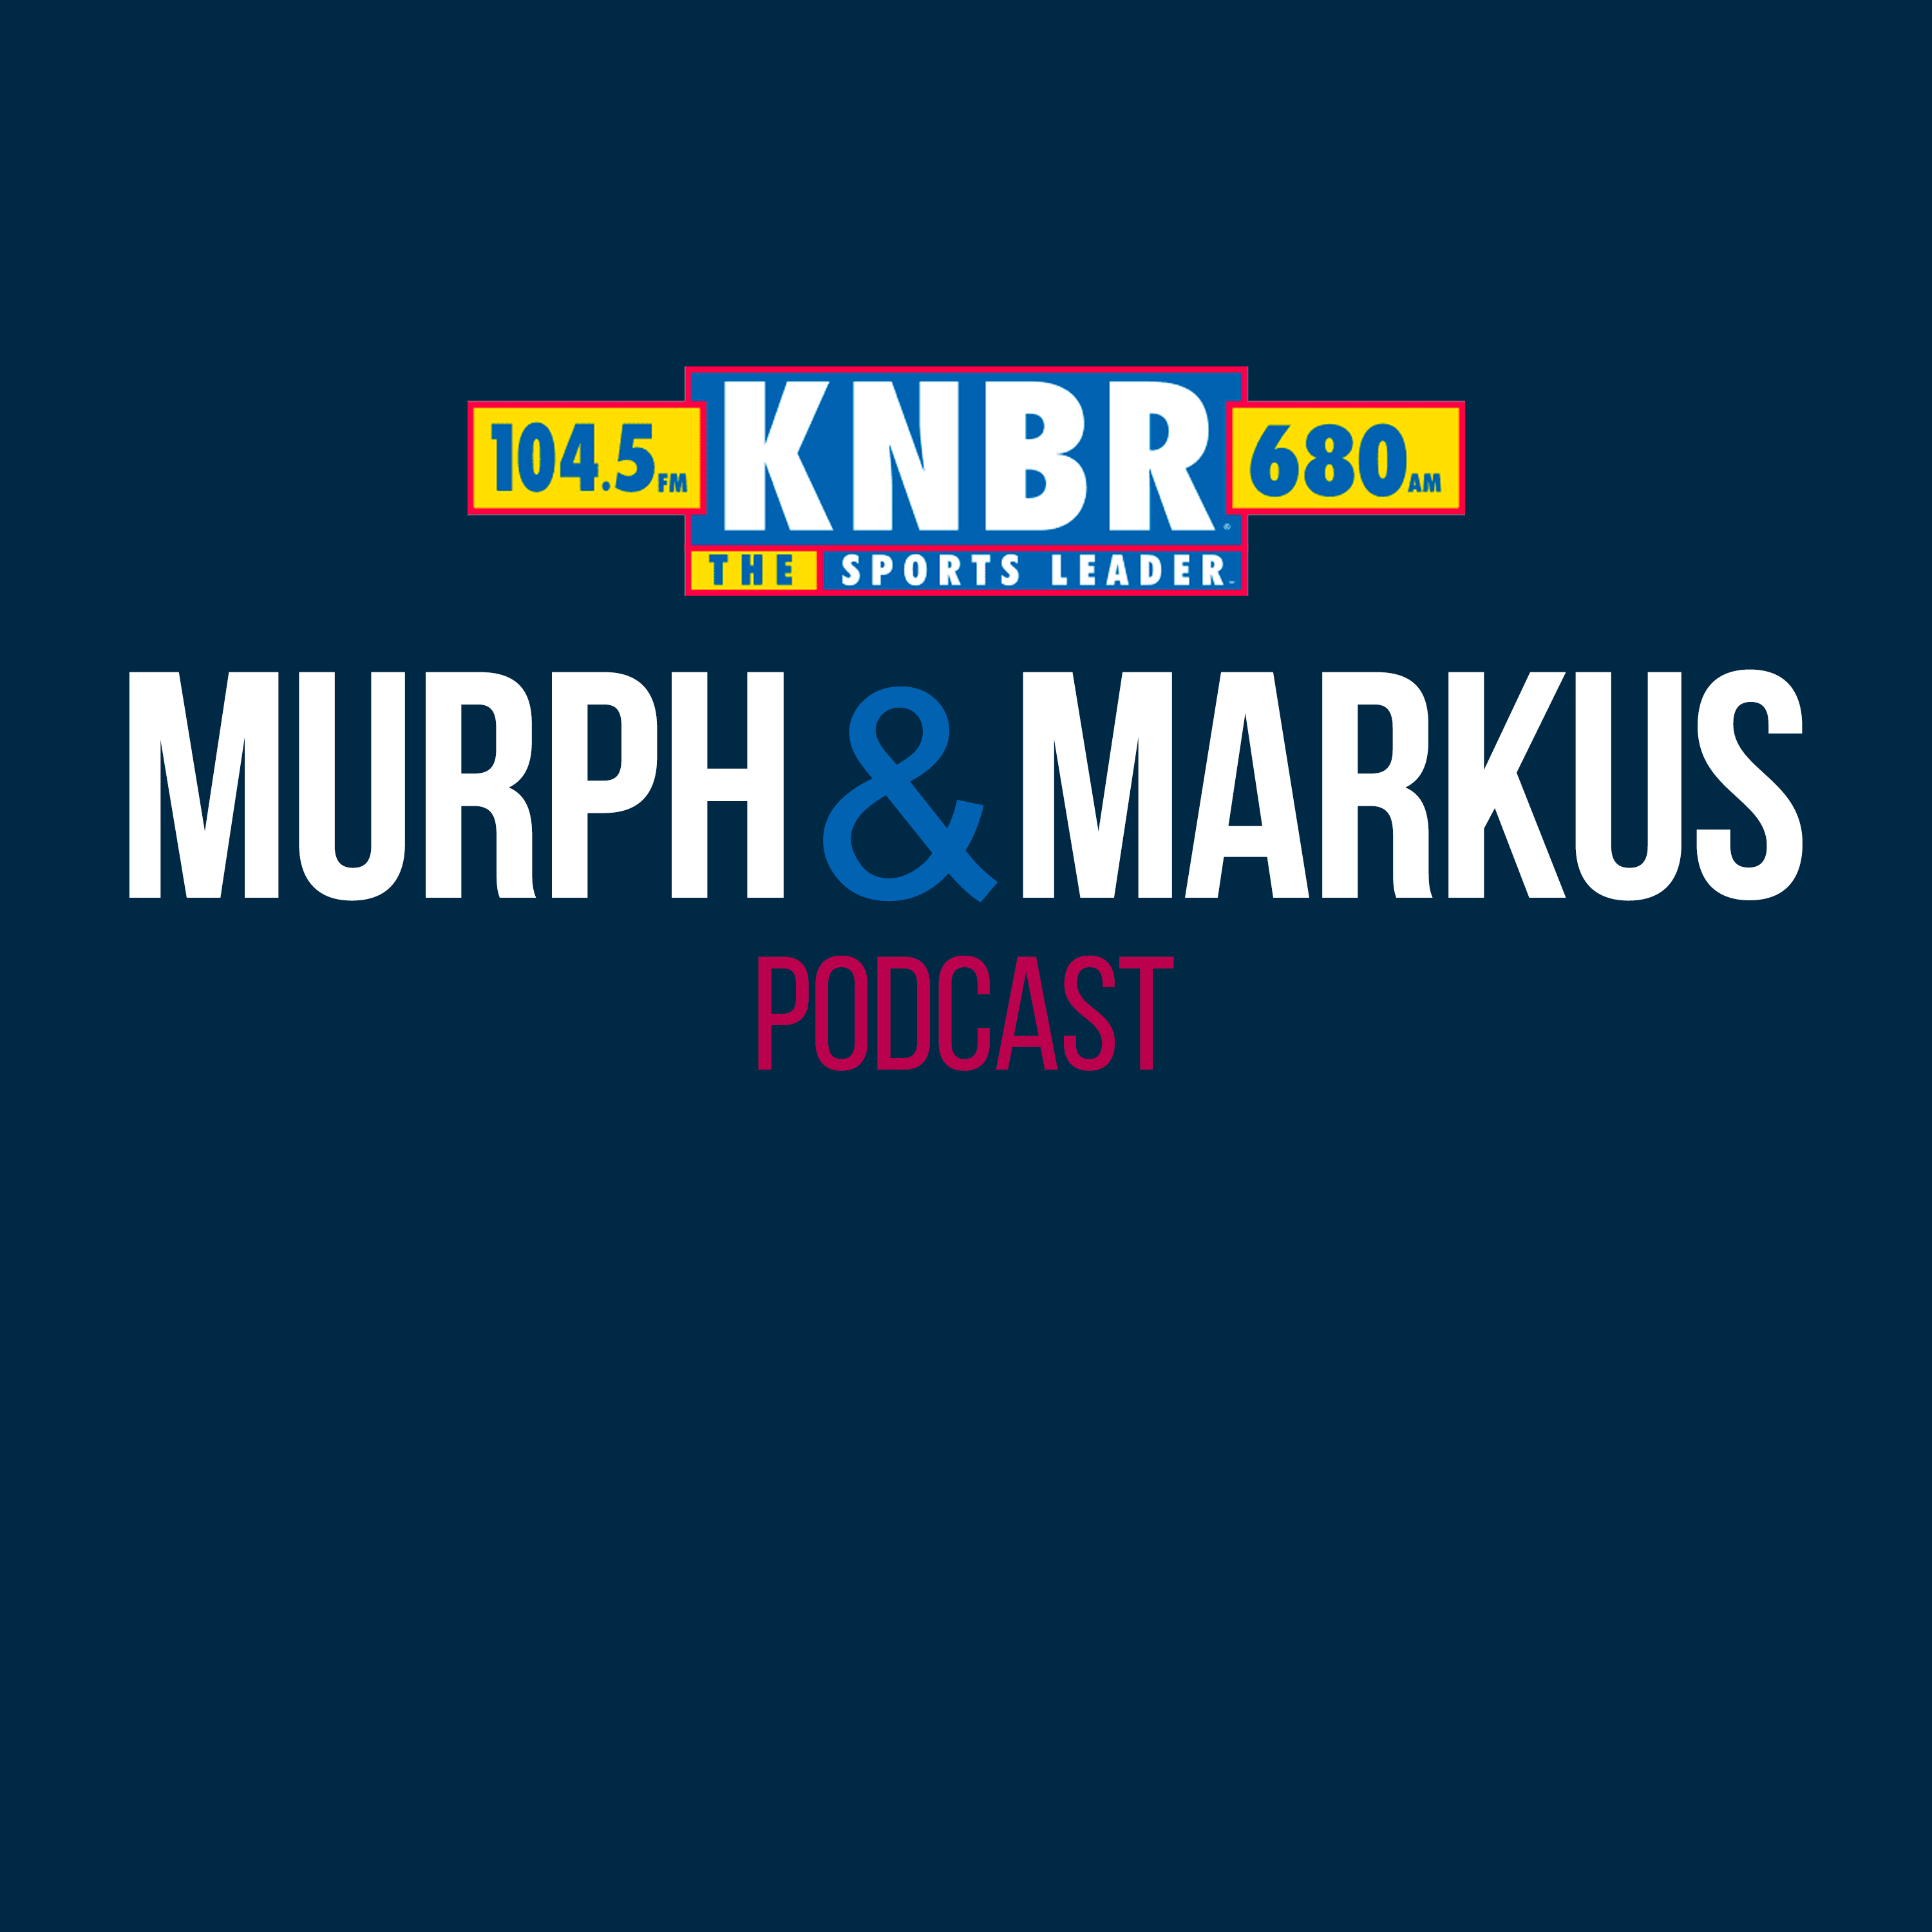 6-10 Former Giants closer, Sergio Romo joined Murph and Markus to discuss his playing days and what Bruce Bochy meant to him as a player